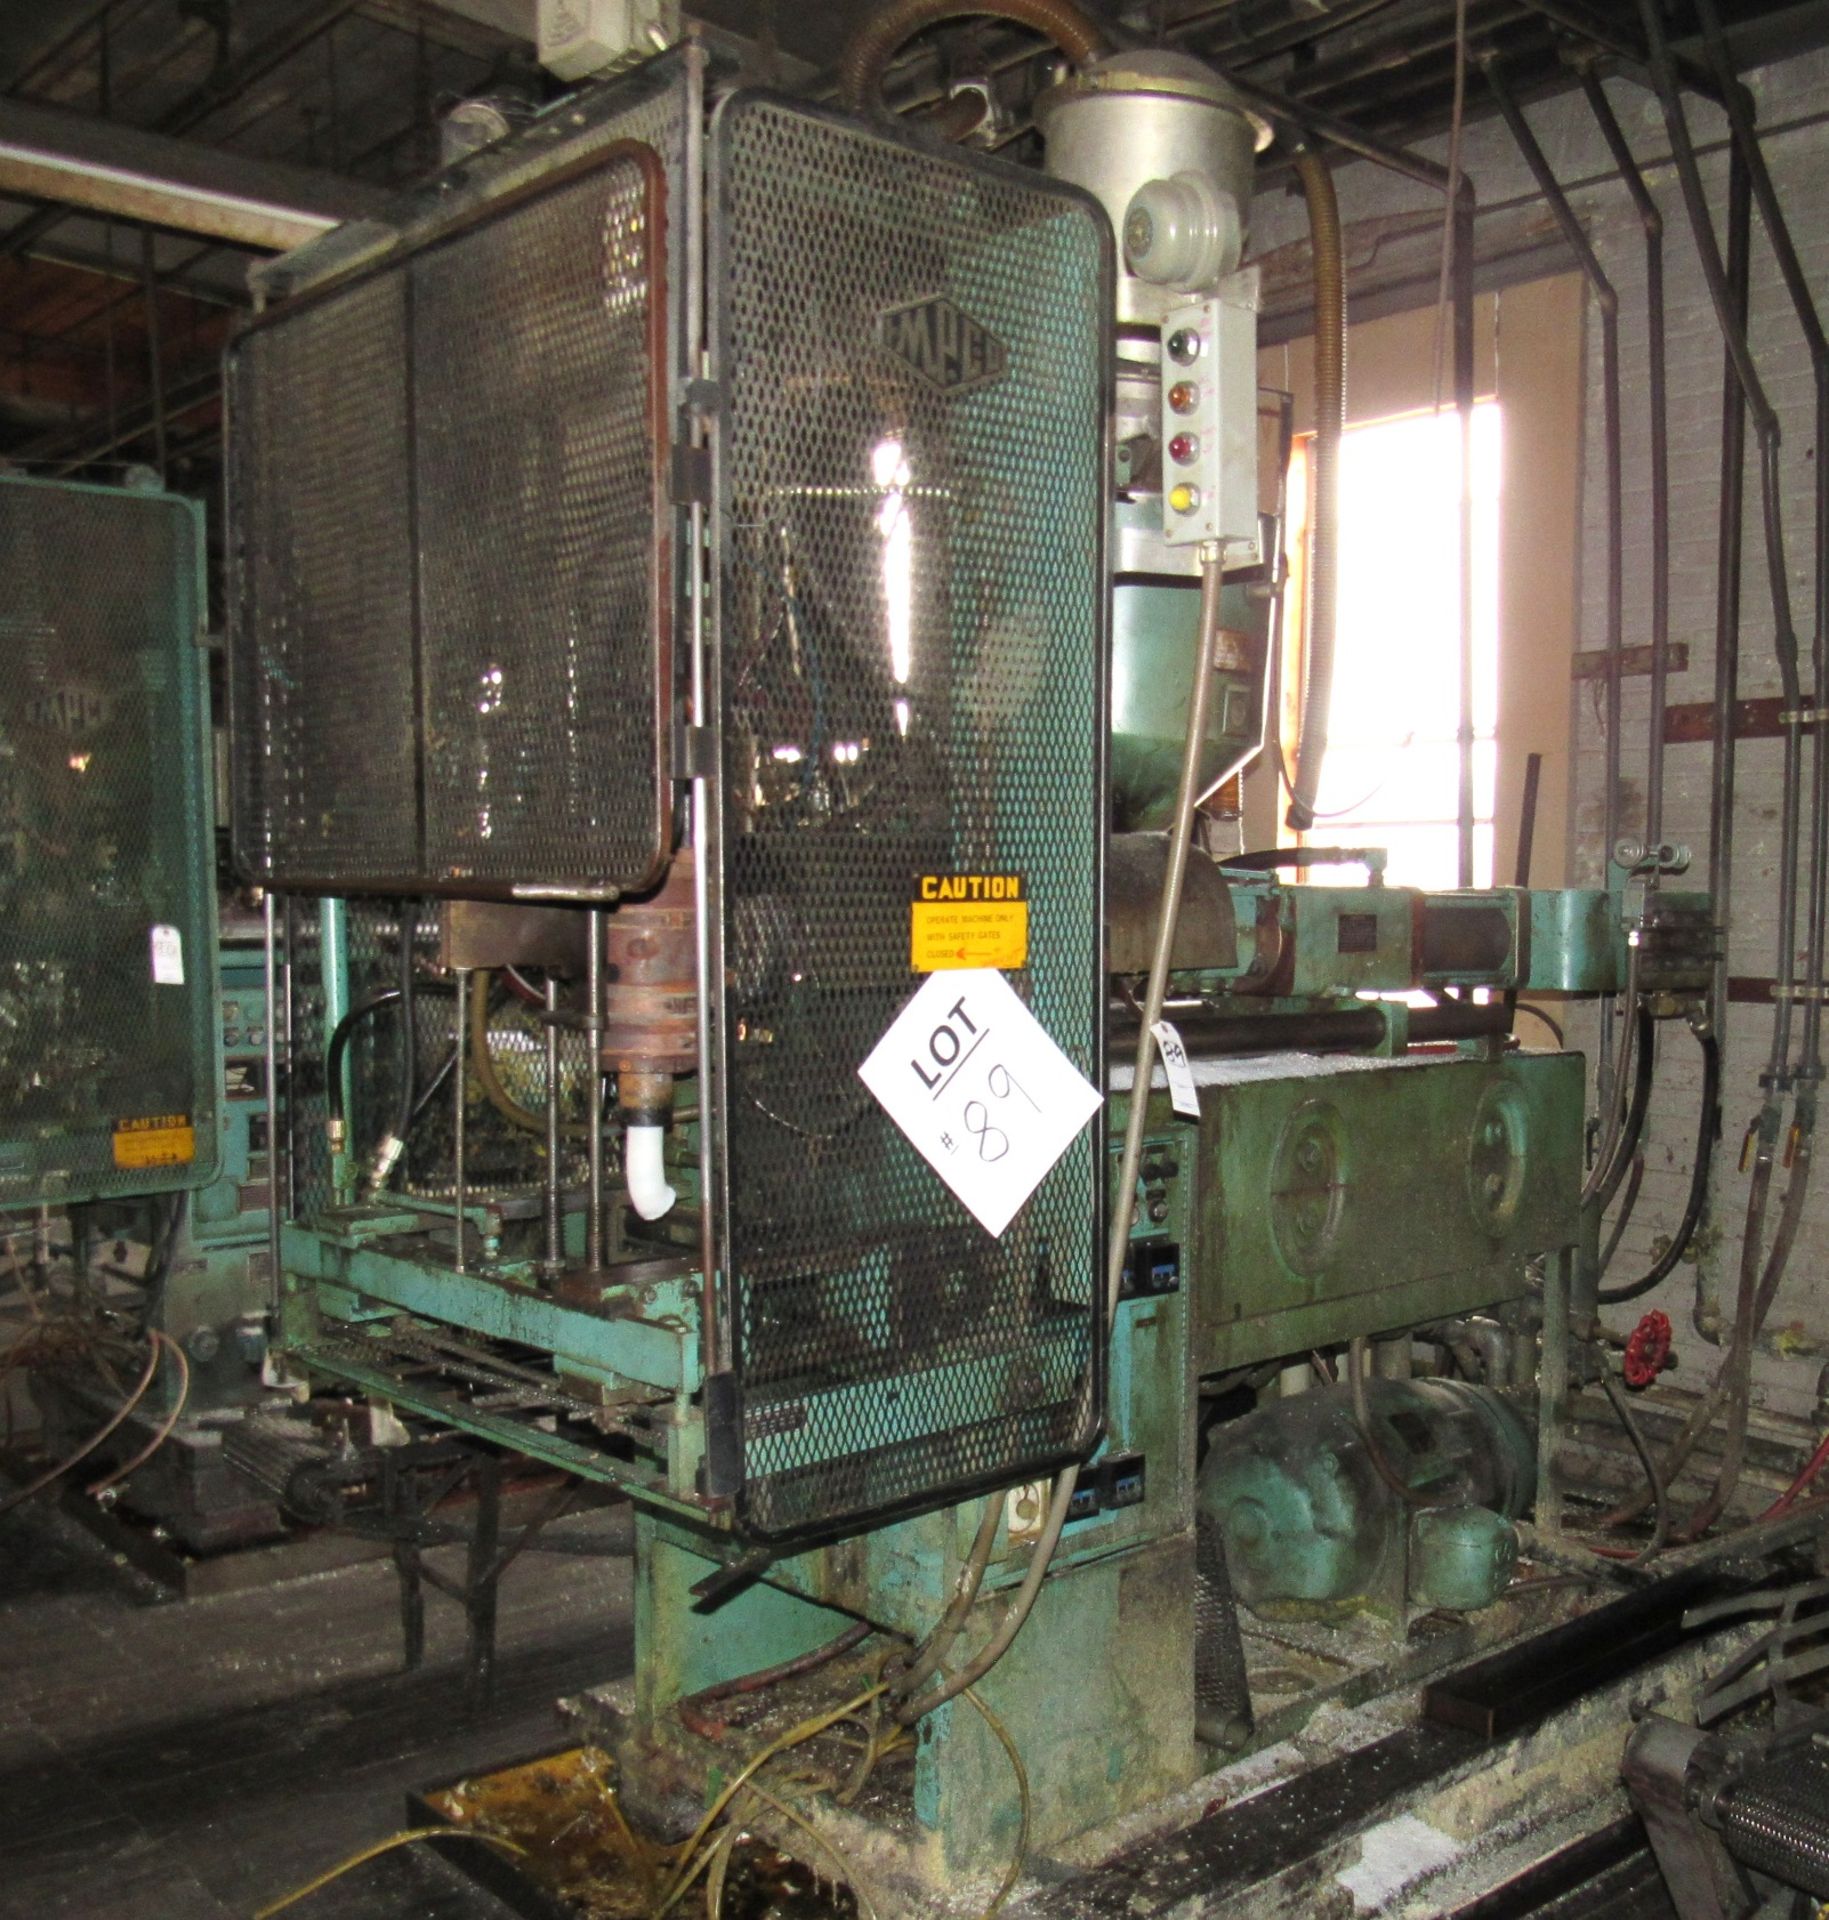 Impco Mod.B13-R25 Blow Molder - S/N M132-72, Complete with Up-Dated Controls, AC Motor ( Note: